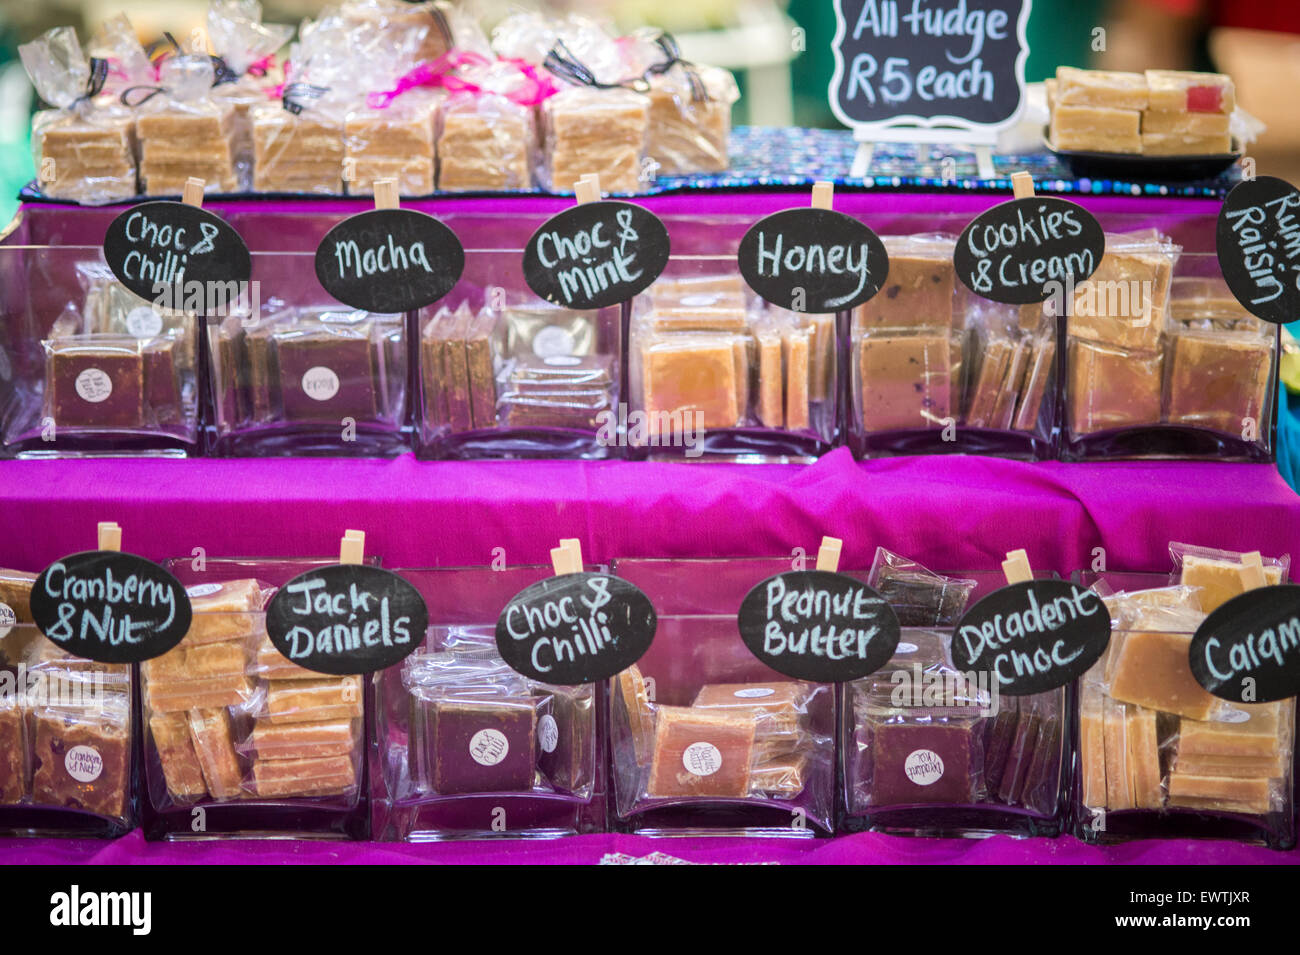 SOUTH AFRICA- Chocolate display at a farmers market in Pretoria Stock Photo